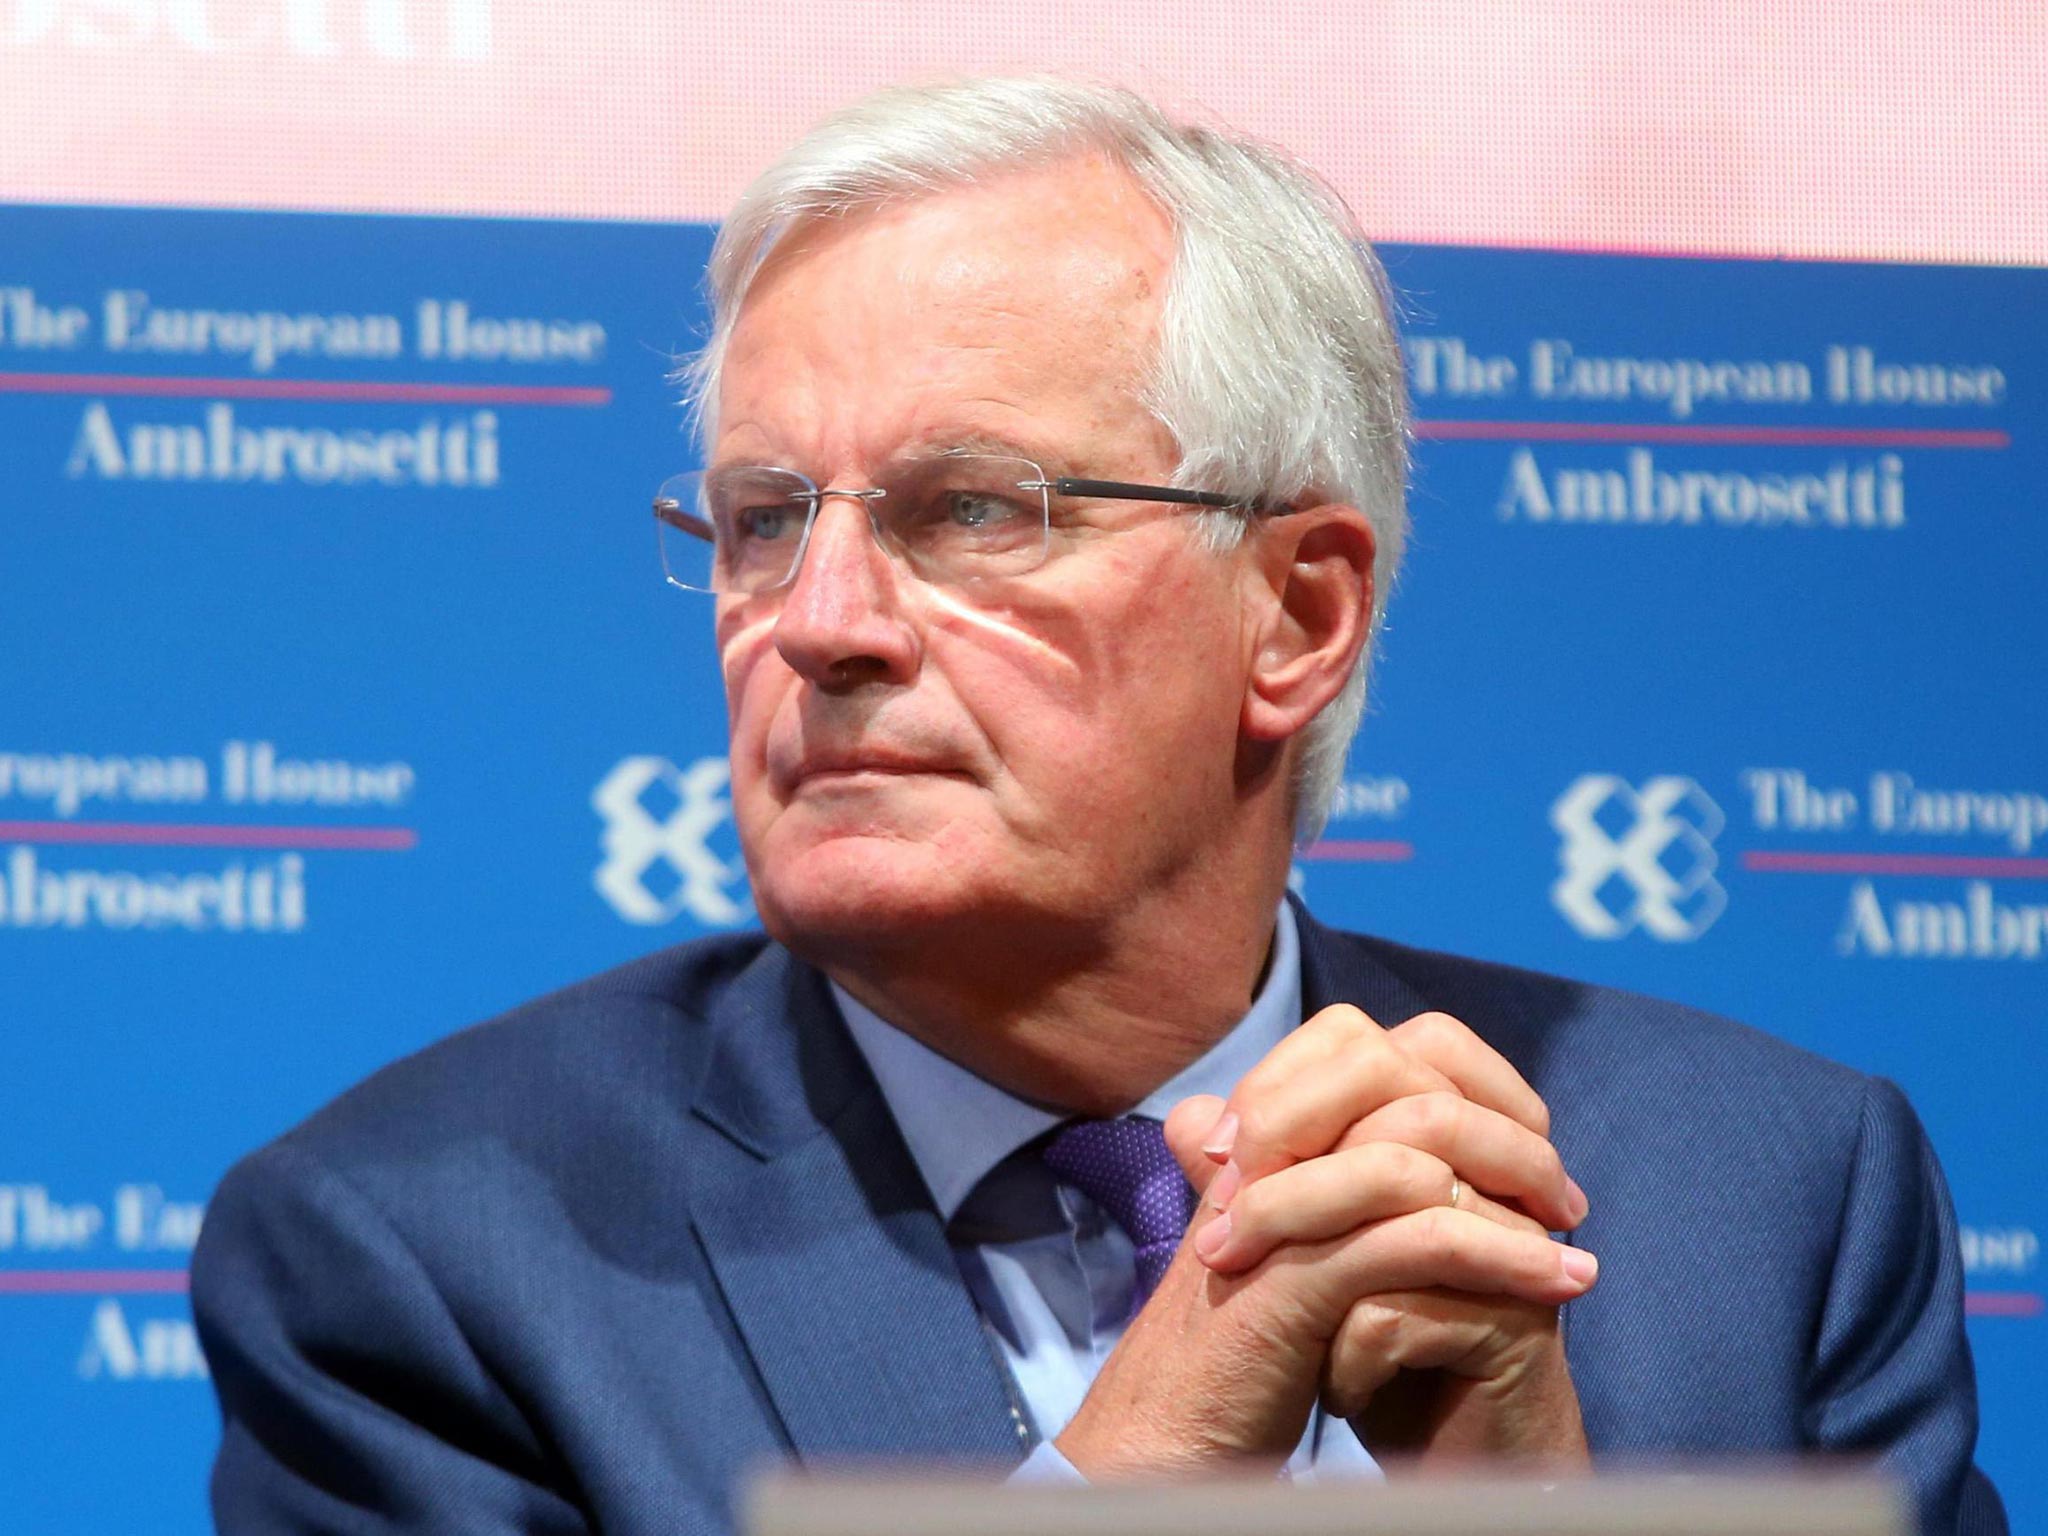 Mr Barnier has refused to discuss a future relationship with the UK until progress has been made on departure issues